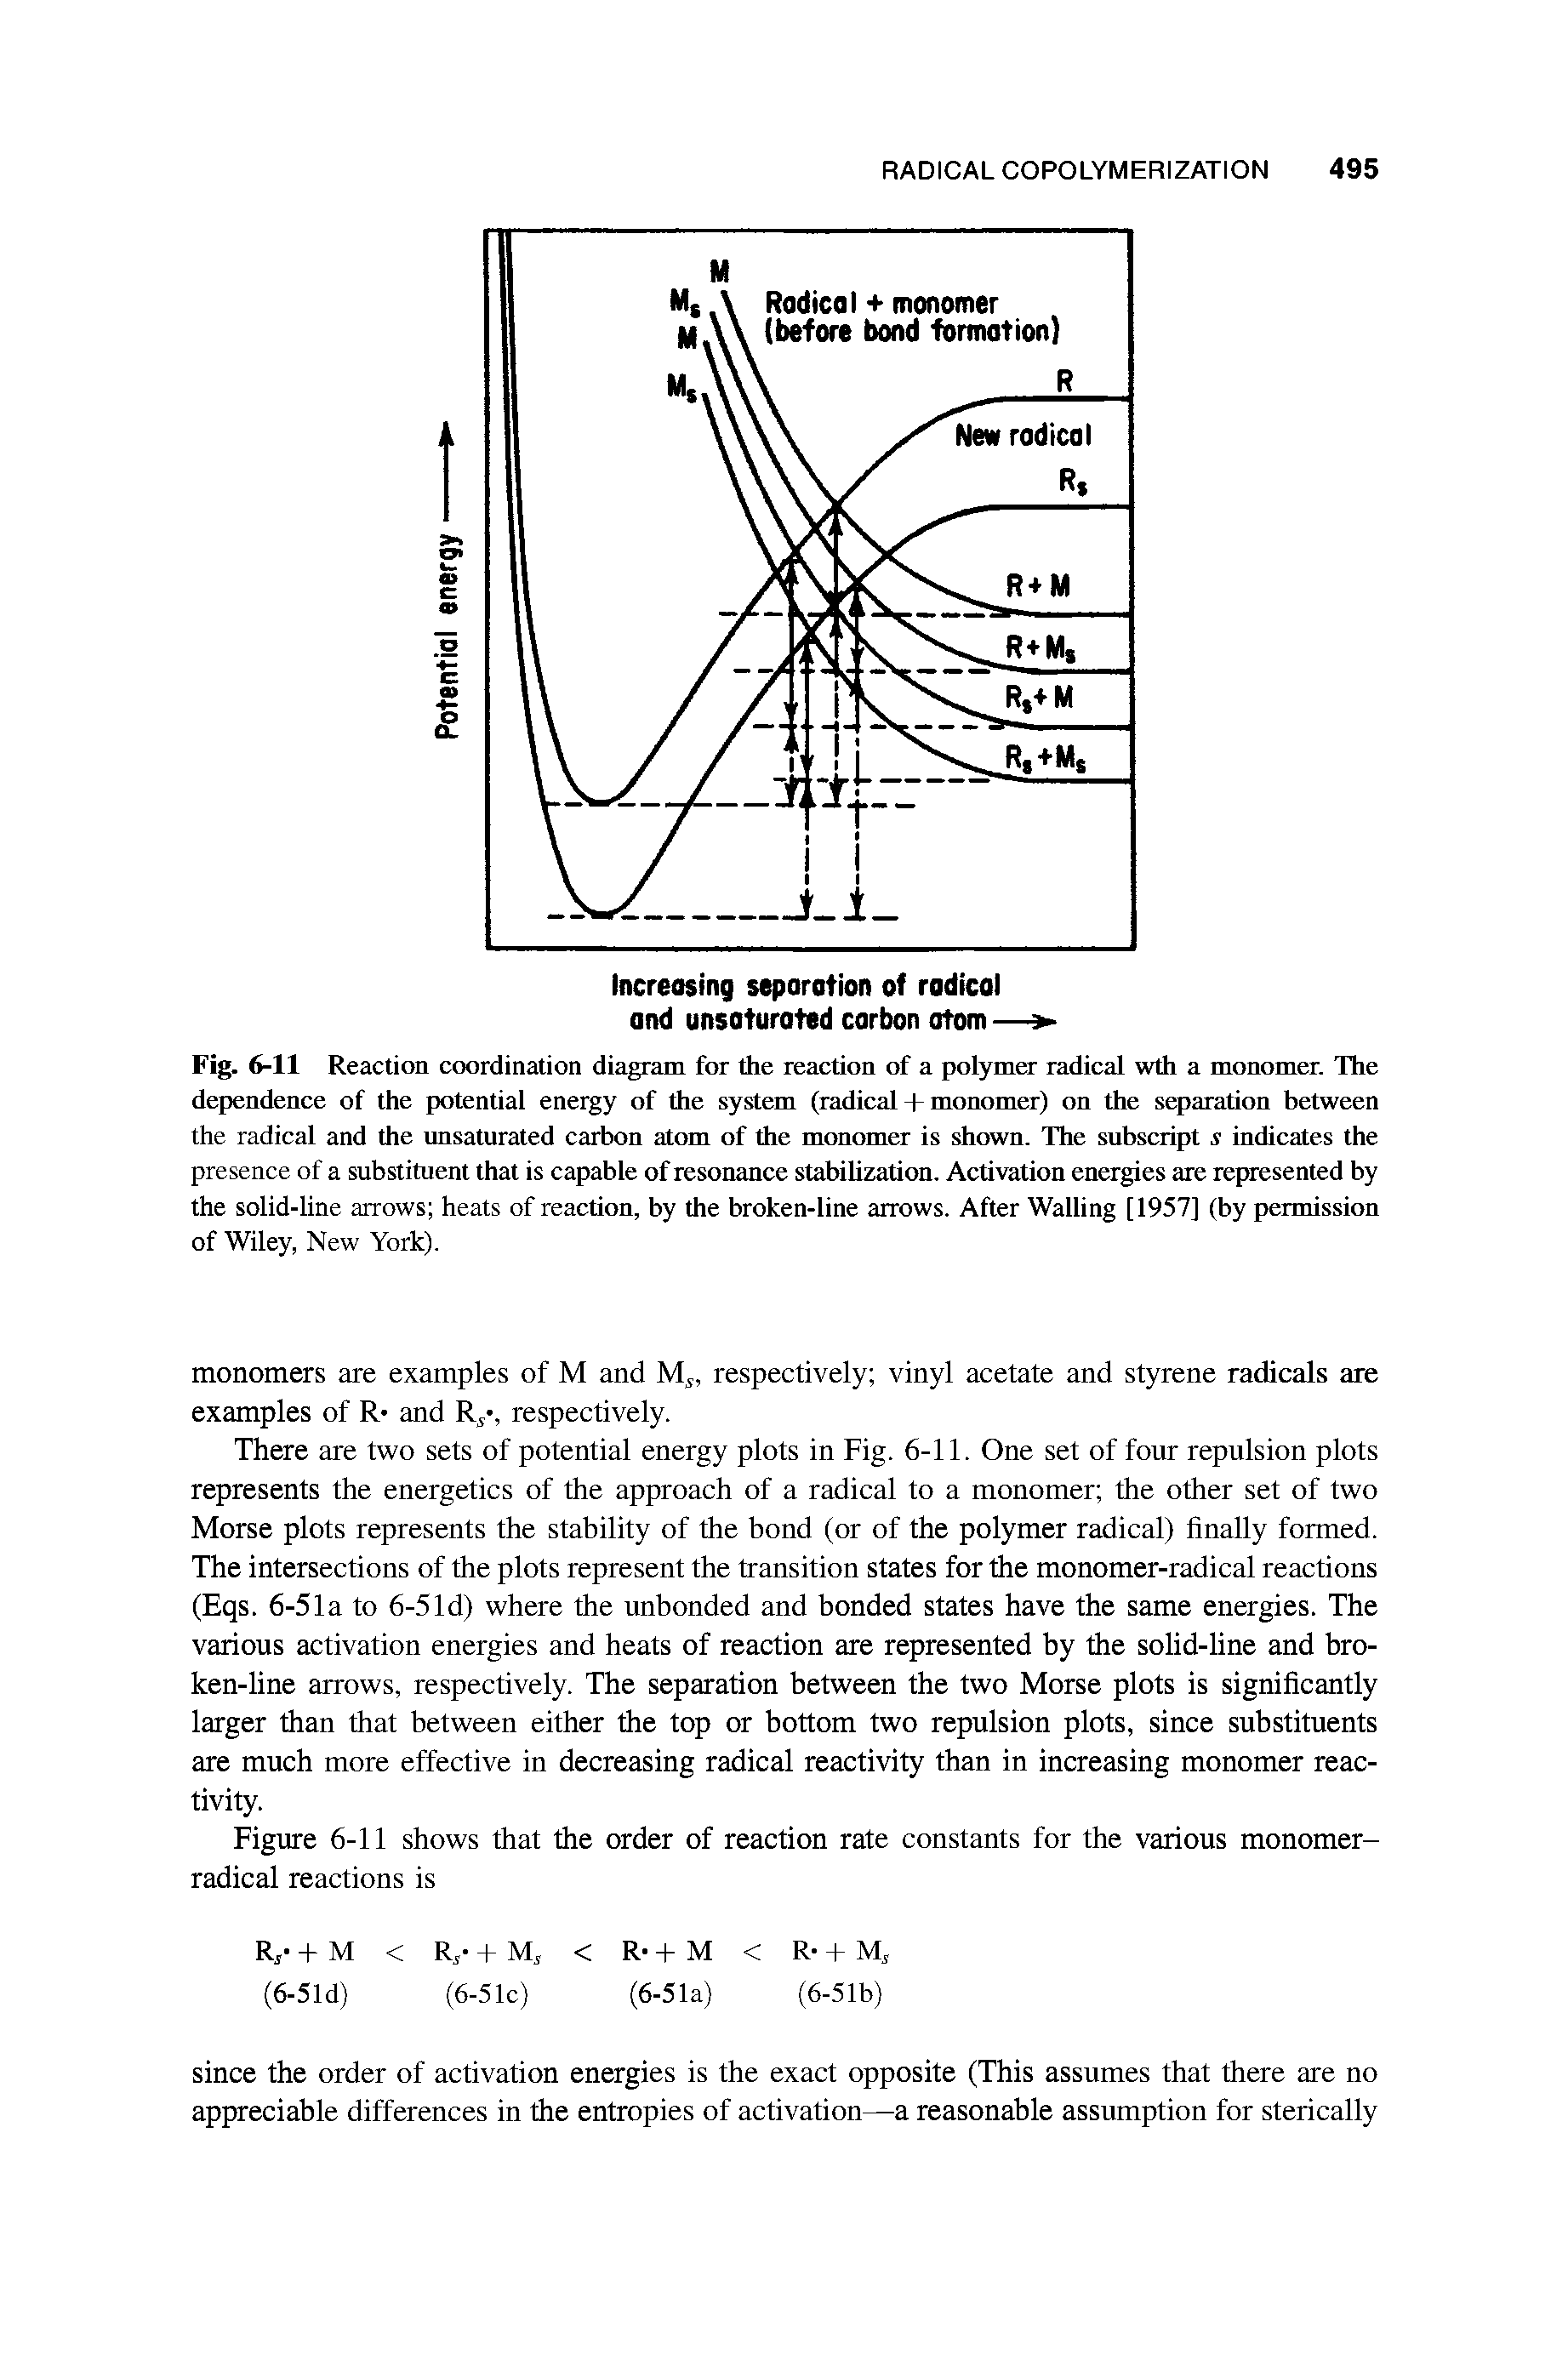 Fig. 6-11 Reaction coordination diagram for the reaction of a polymer radical wth a monomer. The dependence of the potential energy of the system (radical + monomer) on the separation between the radical and the unsaturated carbon atom of the monomer is shown. The subscript. indicates the presence of a substituent that is capable of resonance stabilization. Activation energies are represented by the solid-line arrows heats of reaction, by the broken-line arrows. After Walling [1957] (by permission of Wiley, New York).